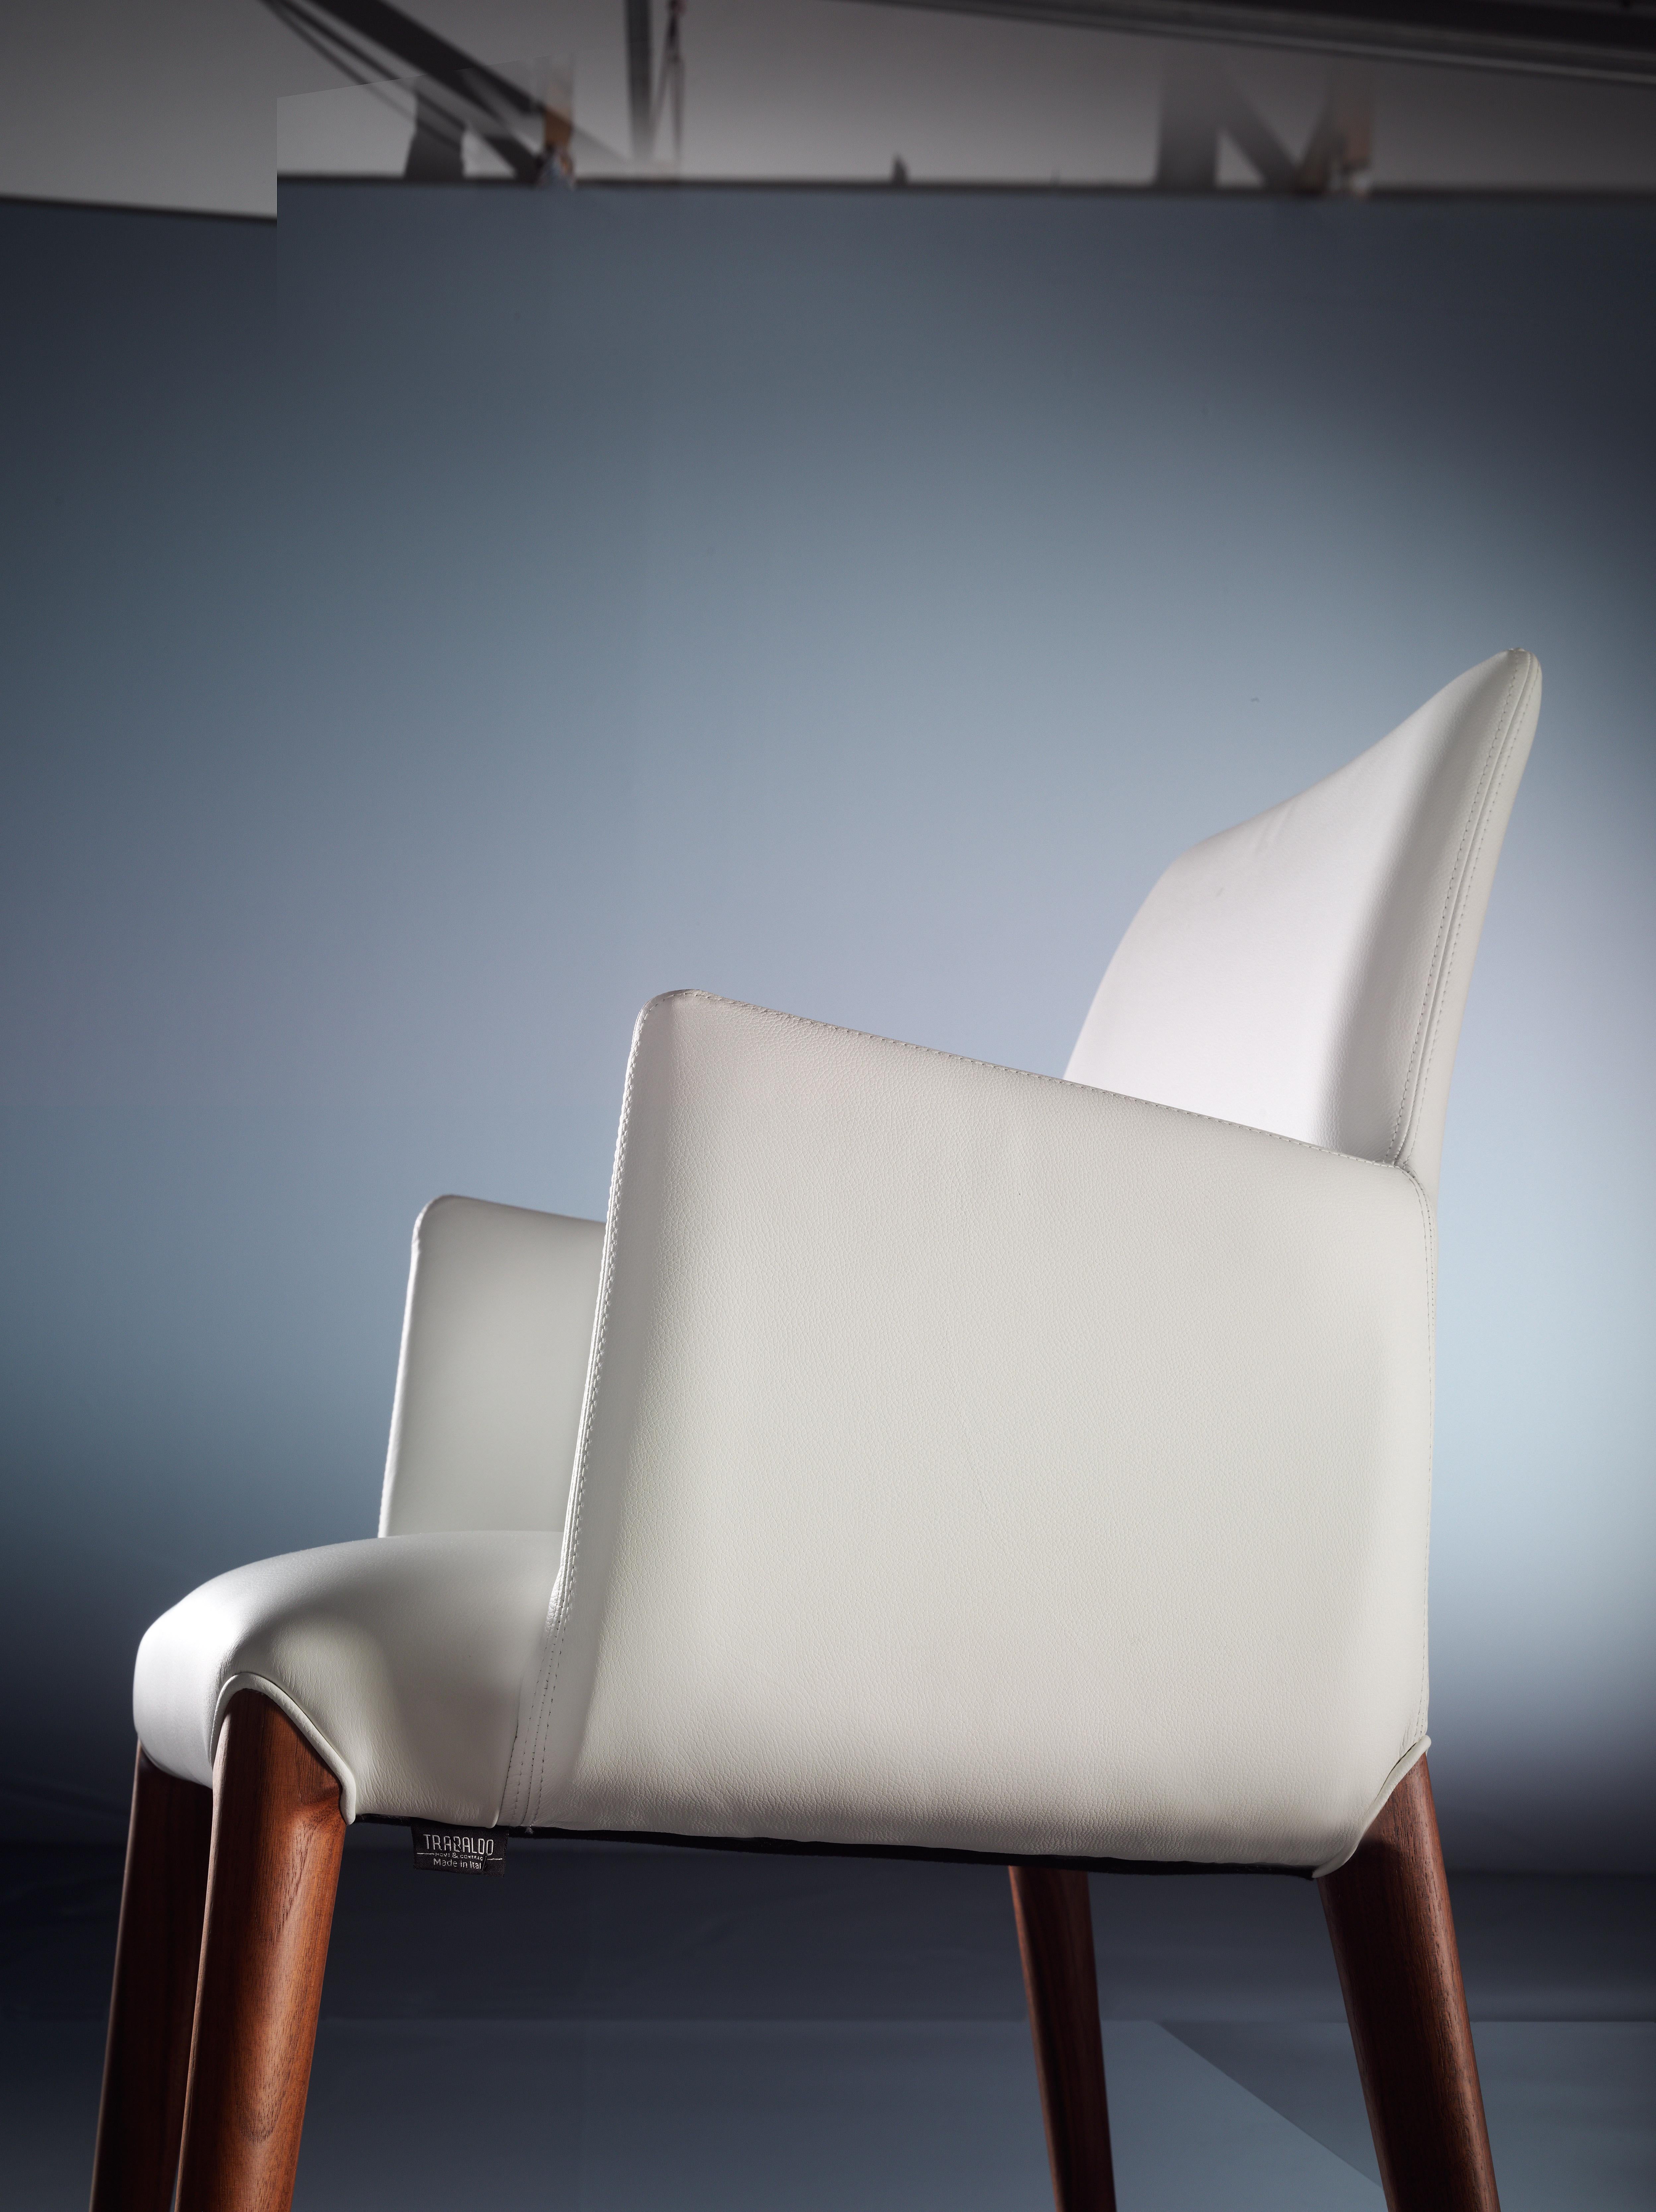 The armchair Ines is the excellent italian manufactures.
The frame in solid wood is curved by hand and work with skill.
The padding is soft ,comfortable and at the same time long-lasting, the leather and all the materials of Italian origin.
The top